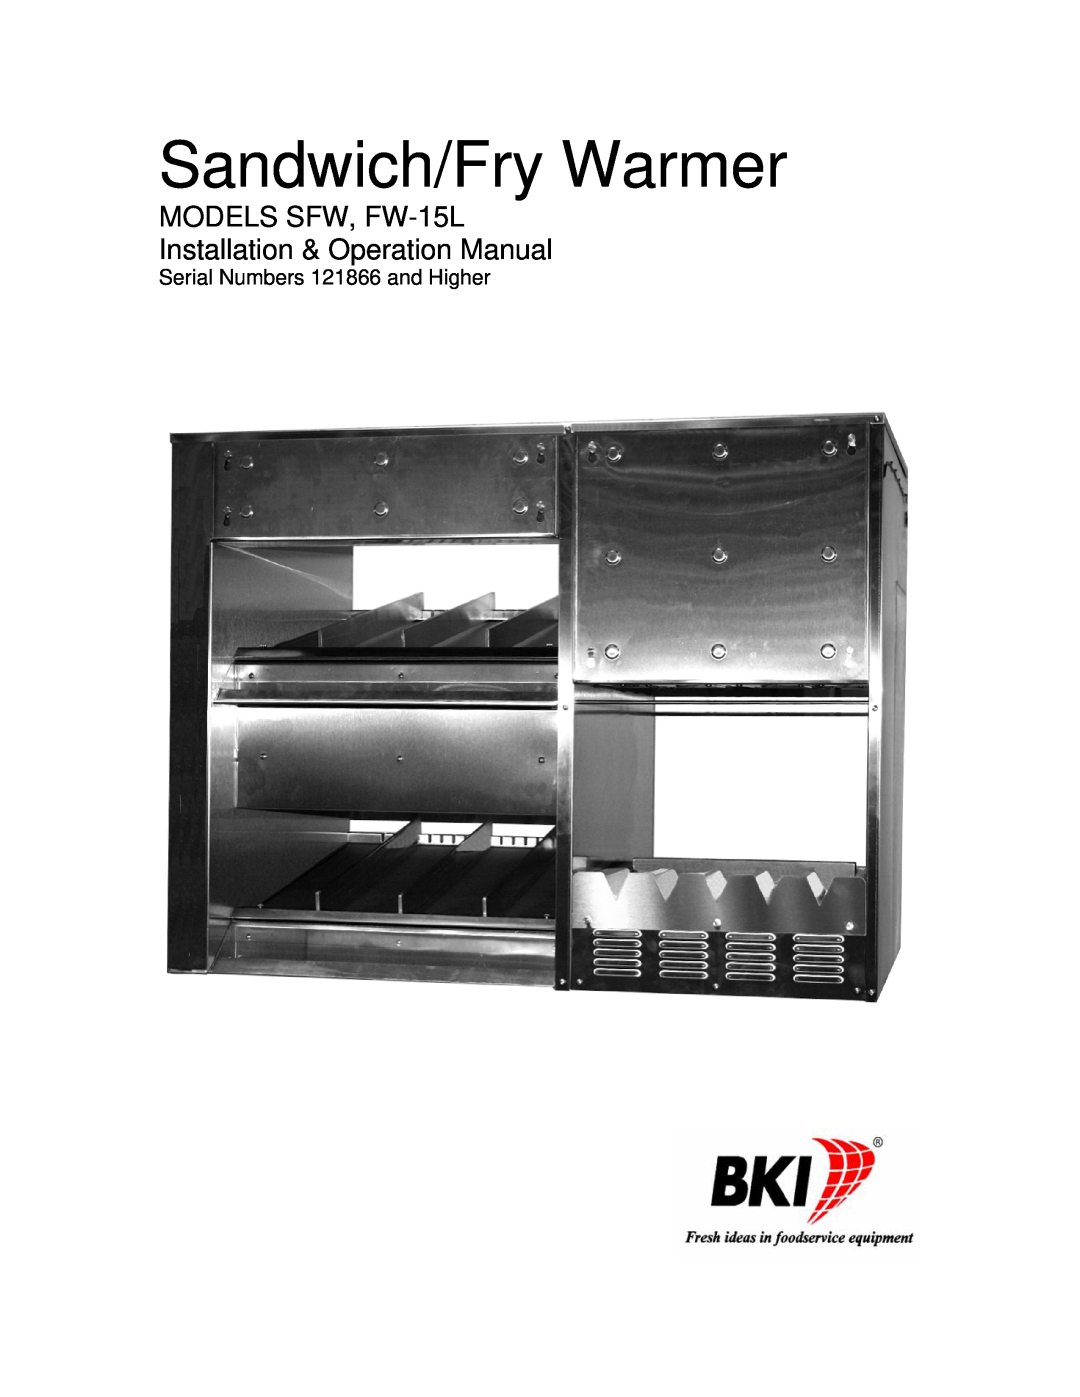 Bakers Pride Oven operation manual Sandwich/Fry Warmer, MODELS SFW, FW-15L, Serial Numbers 121866 and Higher 